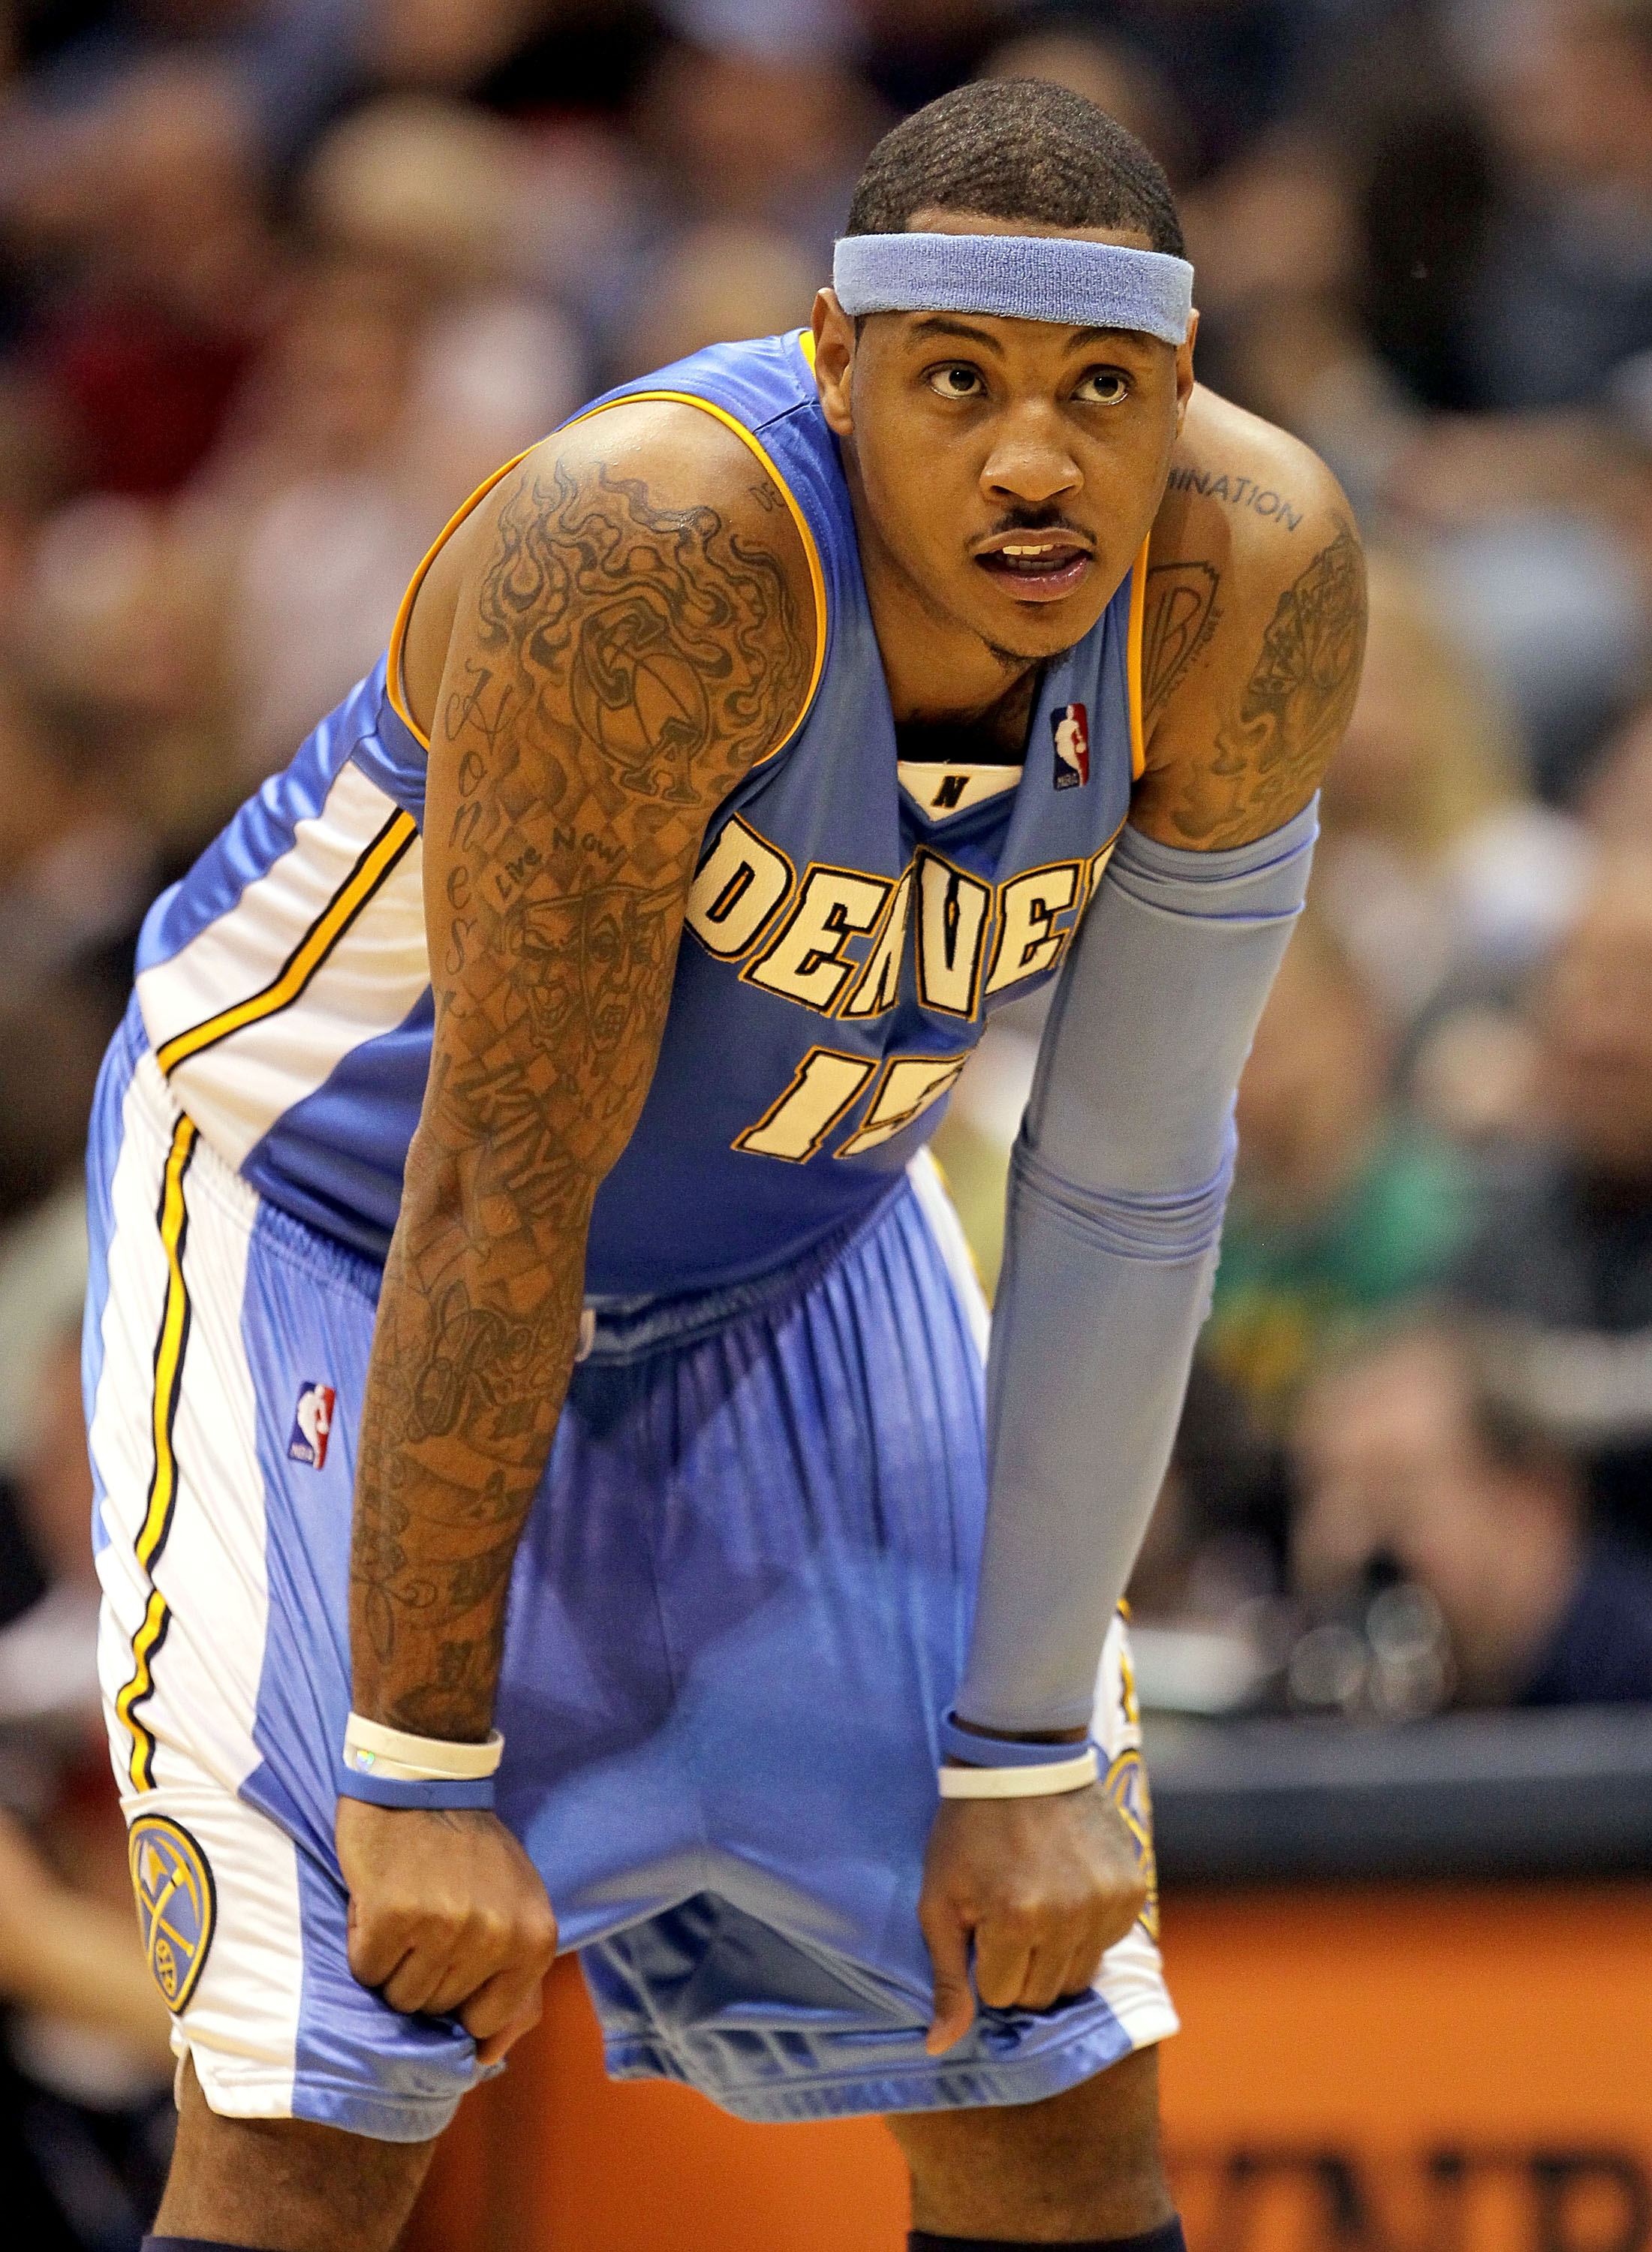 SALT LAKE CITY - APRIL 23:  Carmelo Anthony #15 of the Denver Nuggets is pictured against the Utah Jazz during  Game 3 of the Western Conference Quarterfinals of the 2010 NBA Playoffs at EnergySolutions Arena on April 23, 2010 in Salt Lake City, Utah. NOT